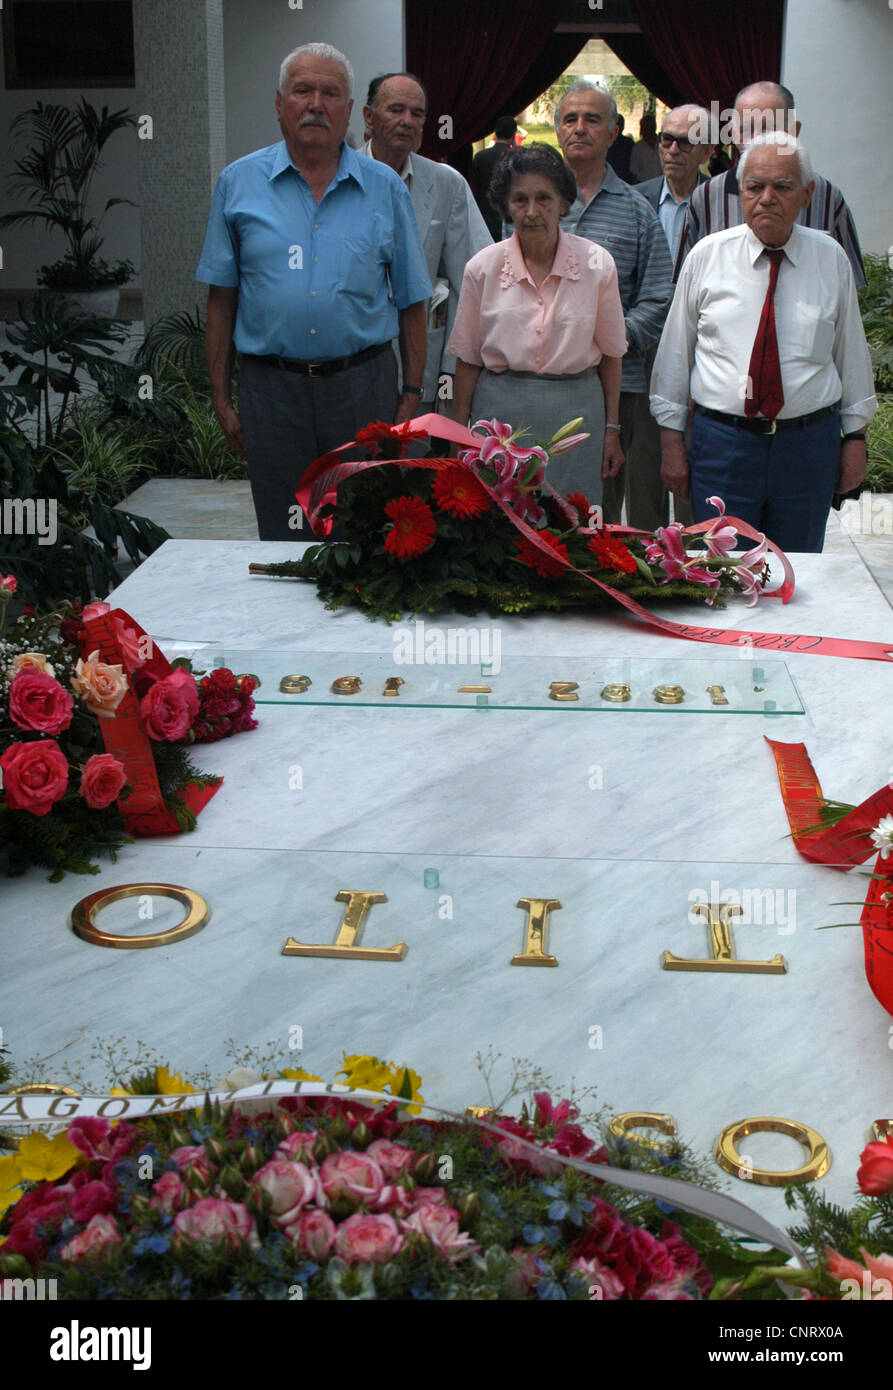 People pay respect to Yugoslavian communist leader Josip Broz Tito on his grave in the House of Flowers (Kuća cveća) in Belgrade, Serbia. Stock Photo